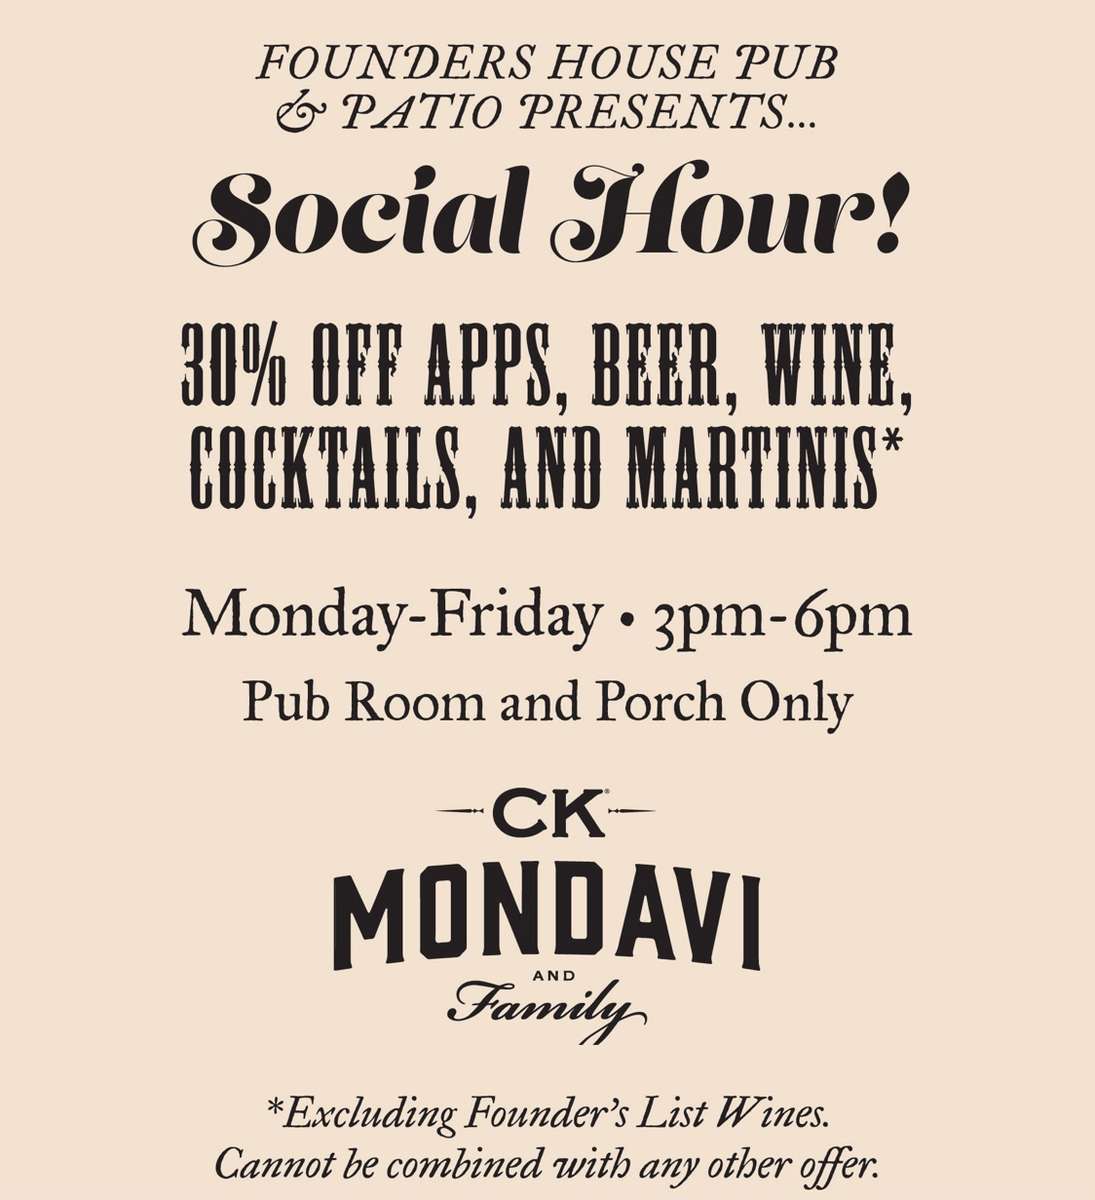 Join Us for Social hour Monday thru Friday from 3-6pm and get 30% off all appetizers, beer, wine and cocktails!